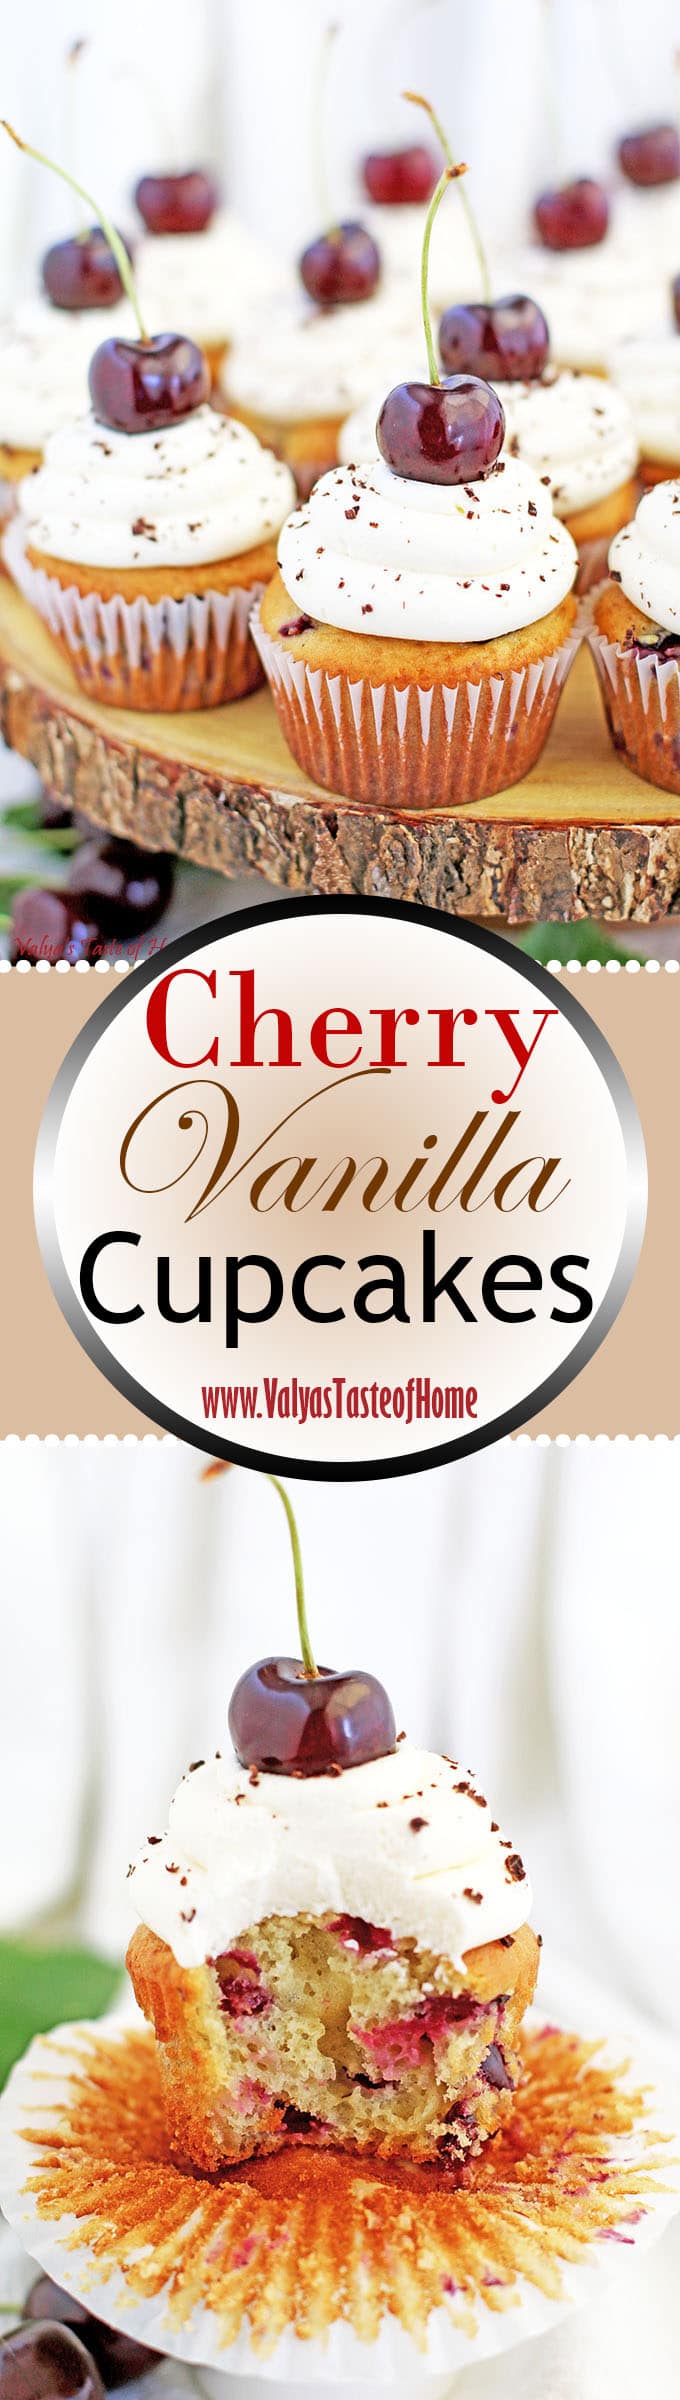 It’s a cherry season and flying by way too fast! I absolutely love cherries. So what does all that add up to? Of course, another Cherry Vanilla Cupcakes Recipe in the form of delicious single-serving dessert. These cupcakes are not only beautiful but incredibly tasty, fluffy, moist, light, and loaded with fresh cherries.